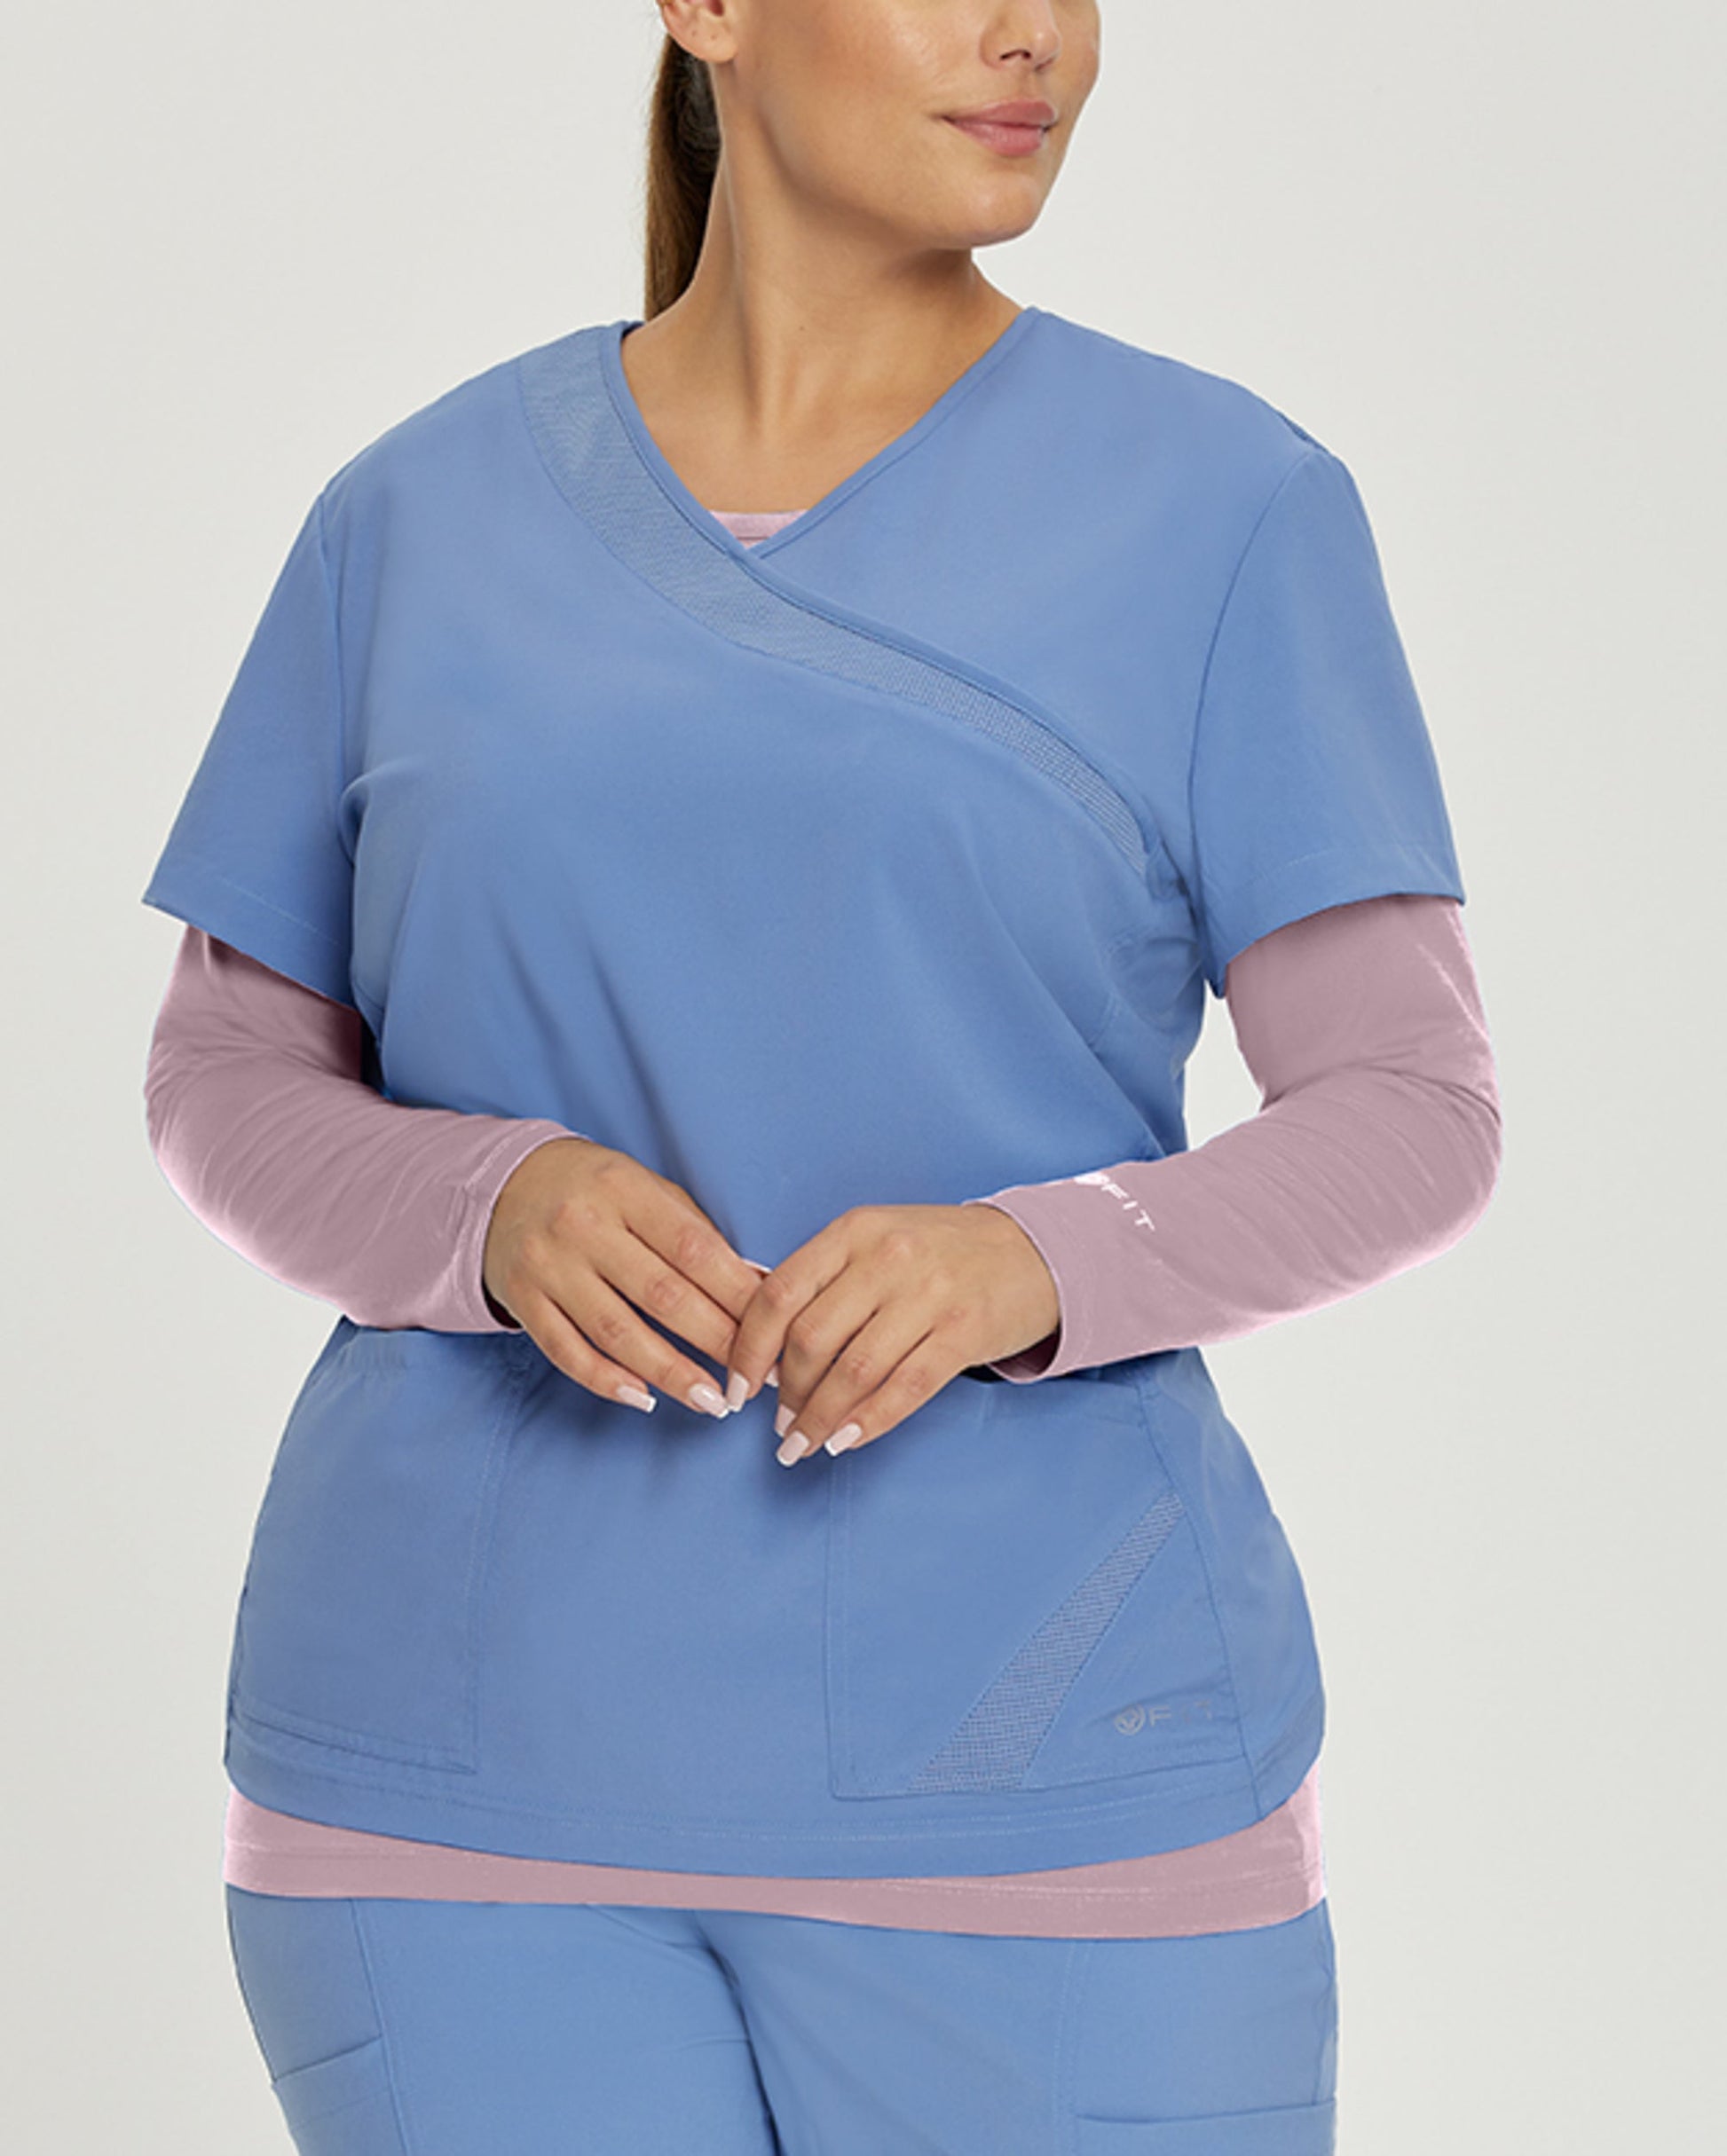 Buy Underscrubs For Mens & Womens for Doctors and Medical